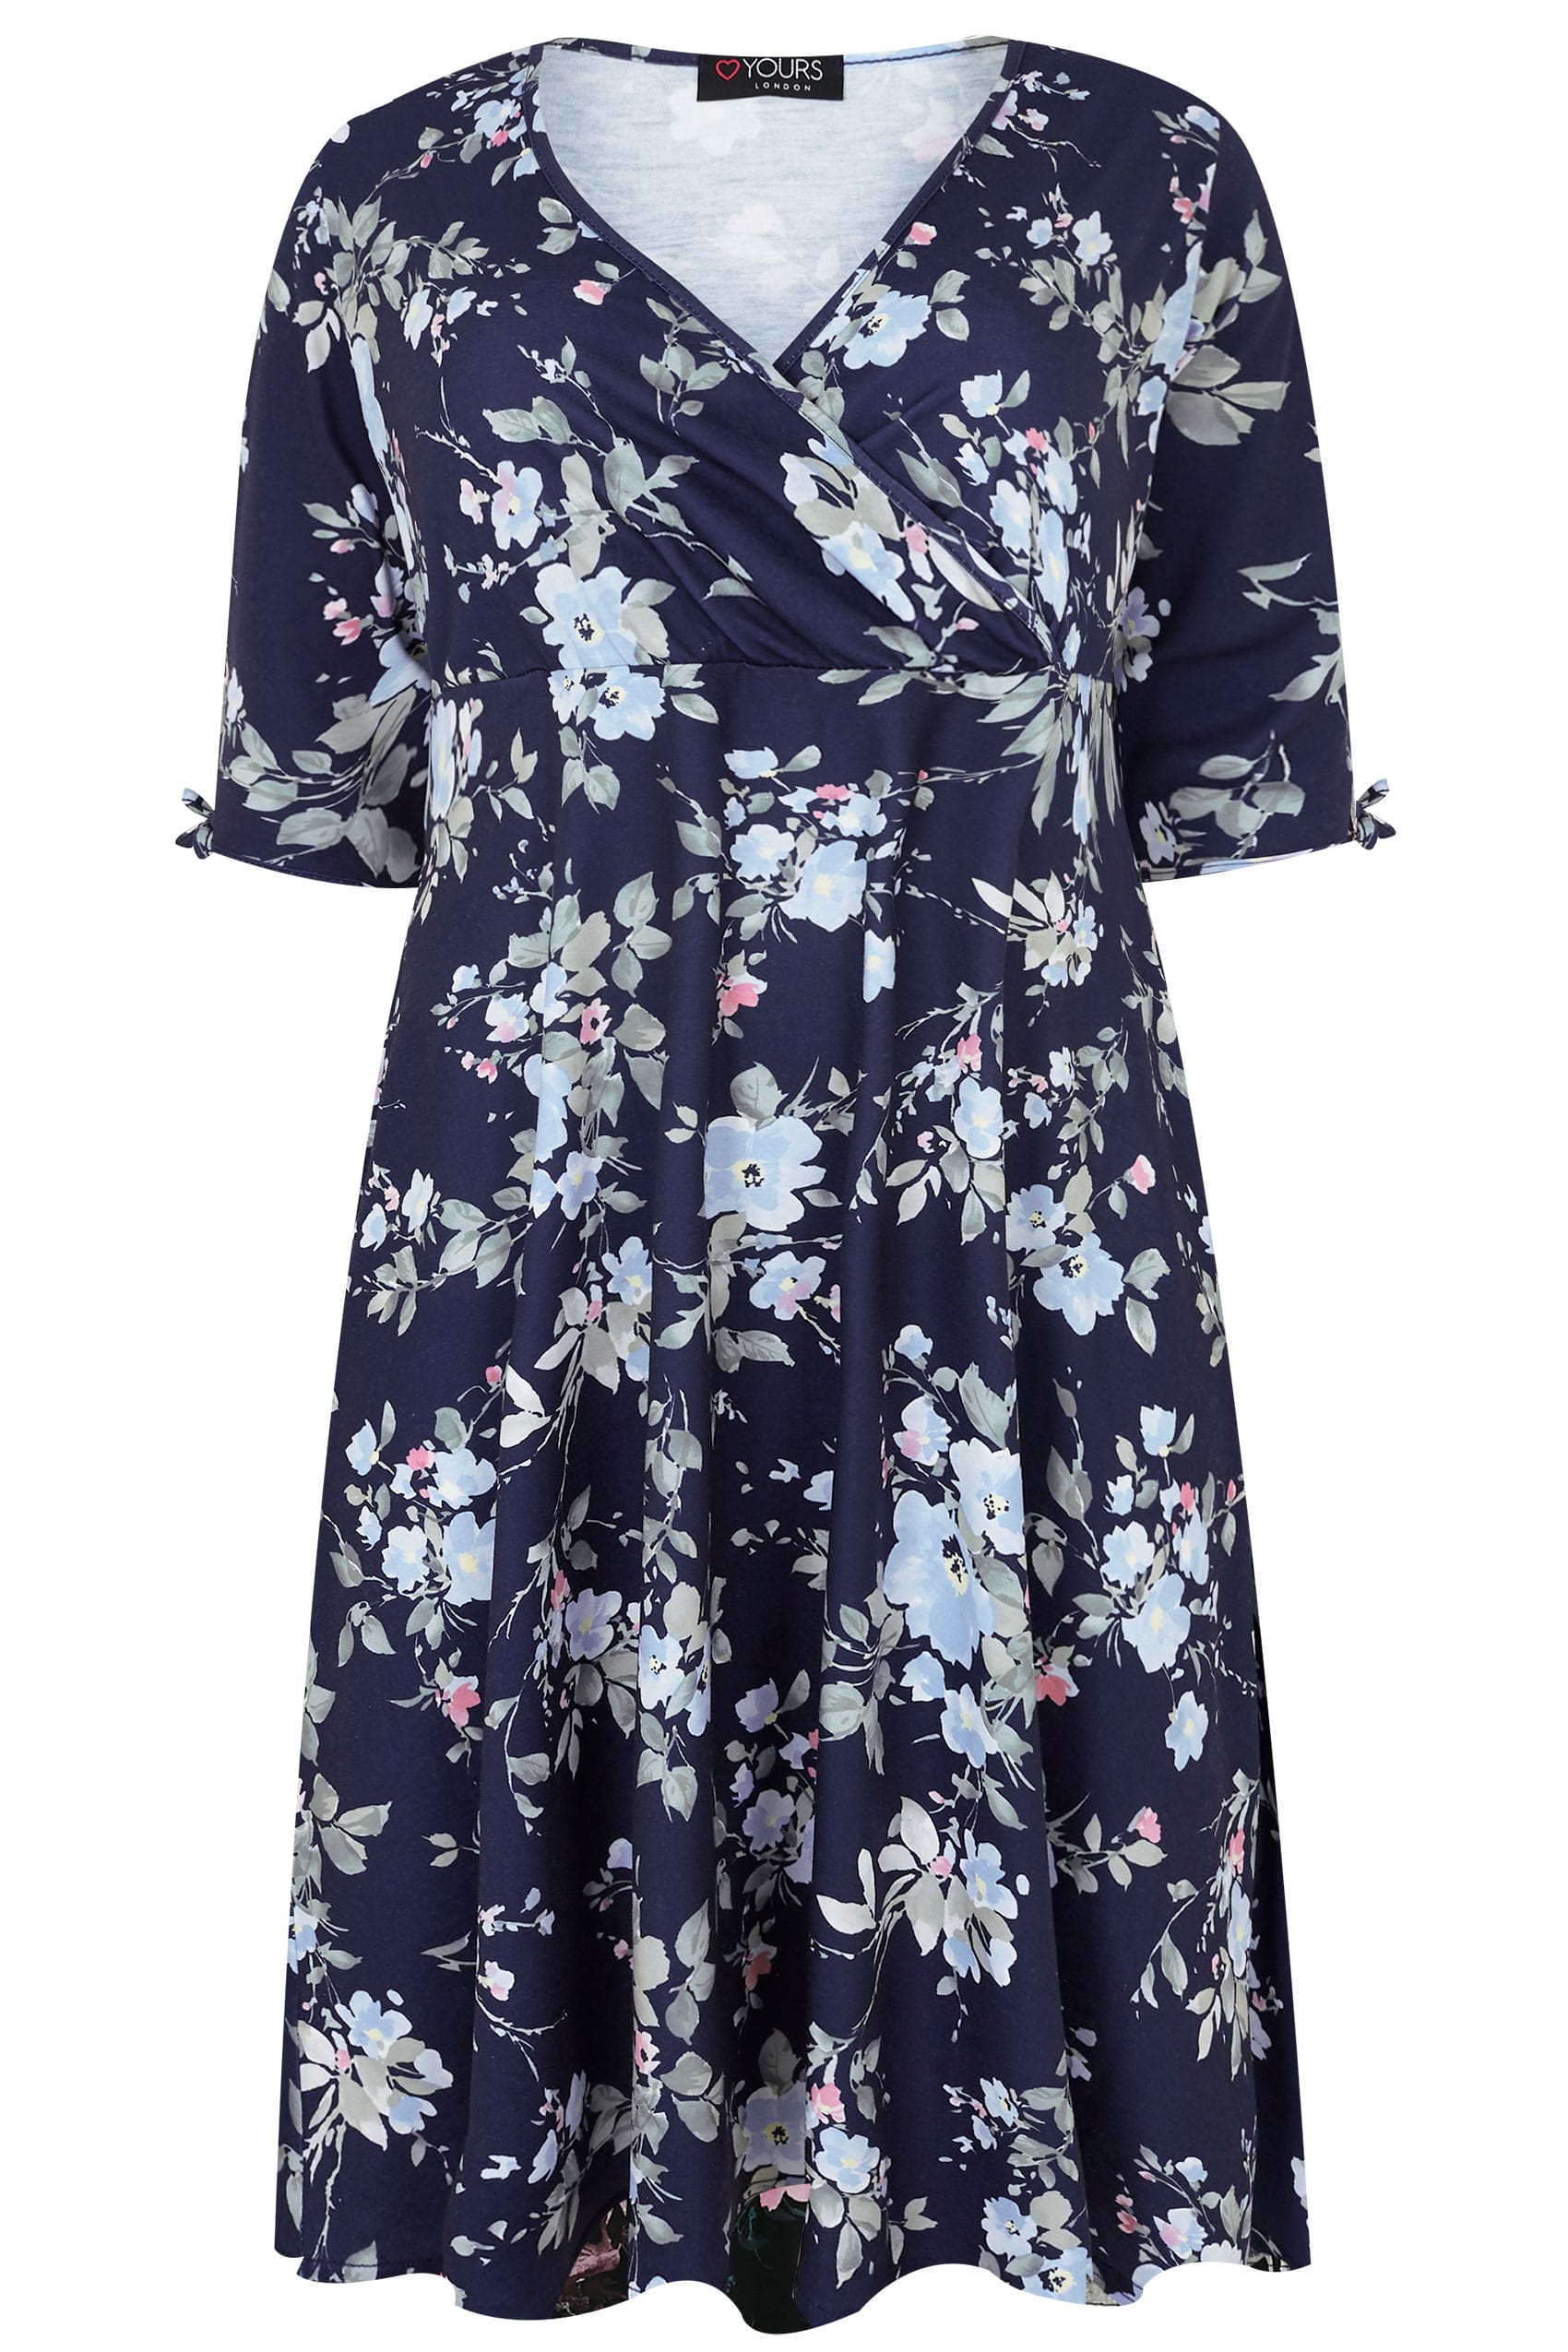 YOURS LONDON Navy Floral Wrap Dress With Tie Sleeves, Plus size 16 to 32